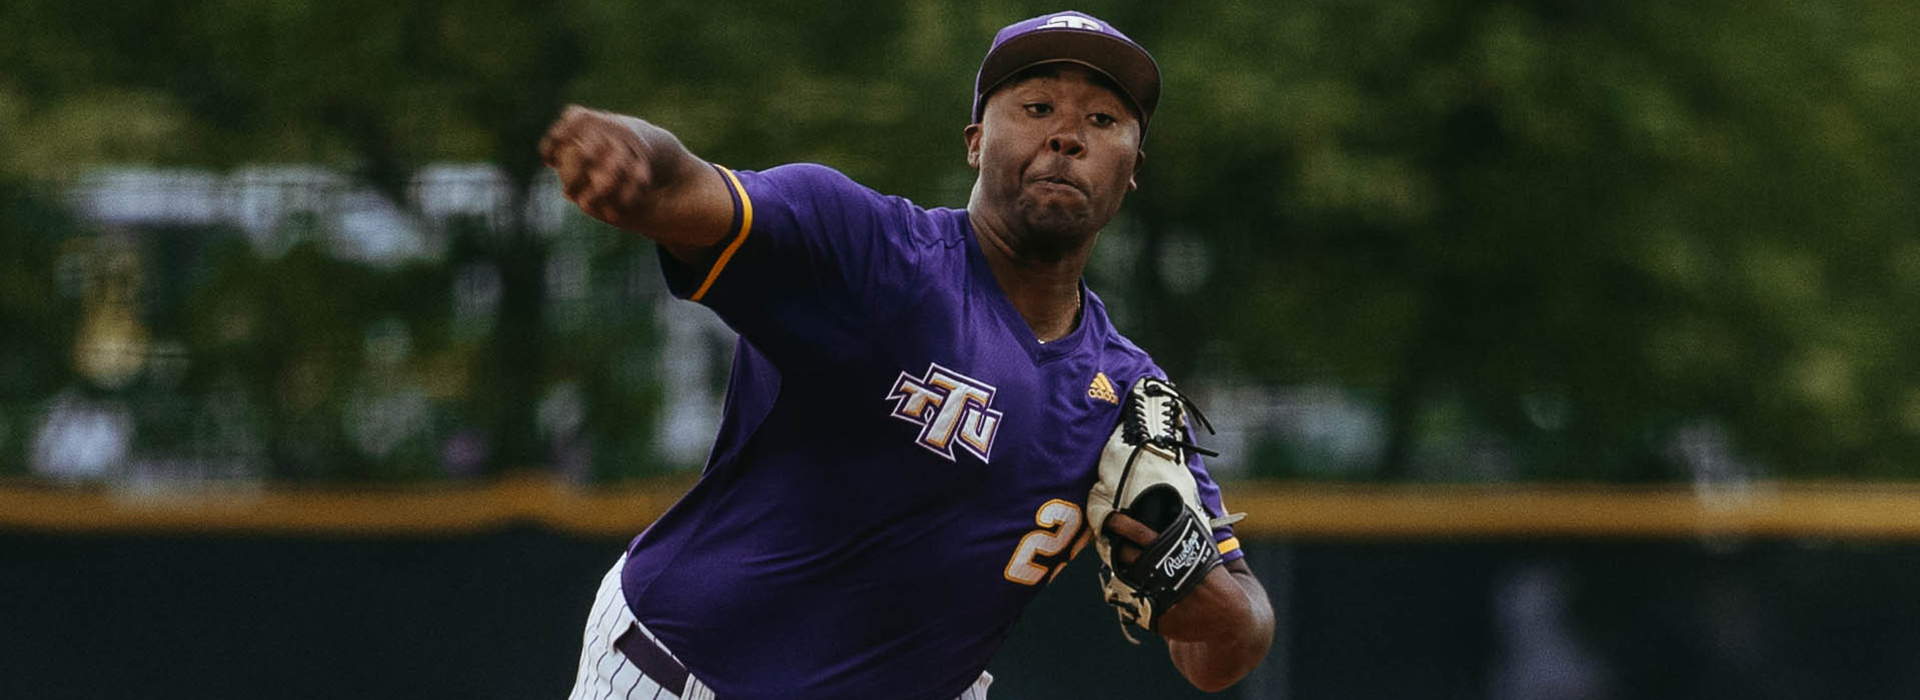 Purple and gold fall at SIUE in walk-off in 11th